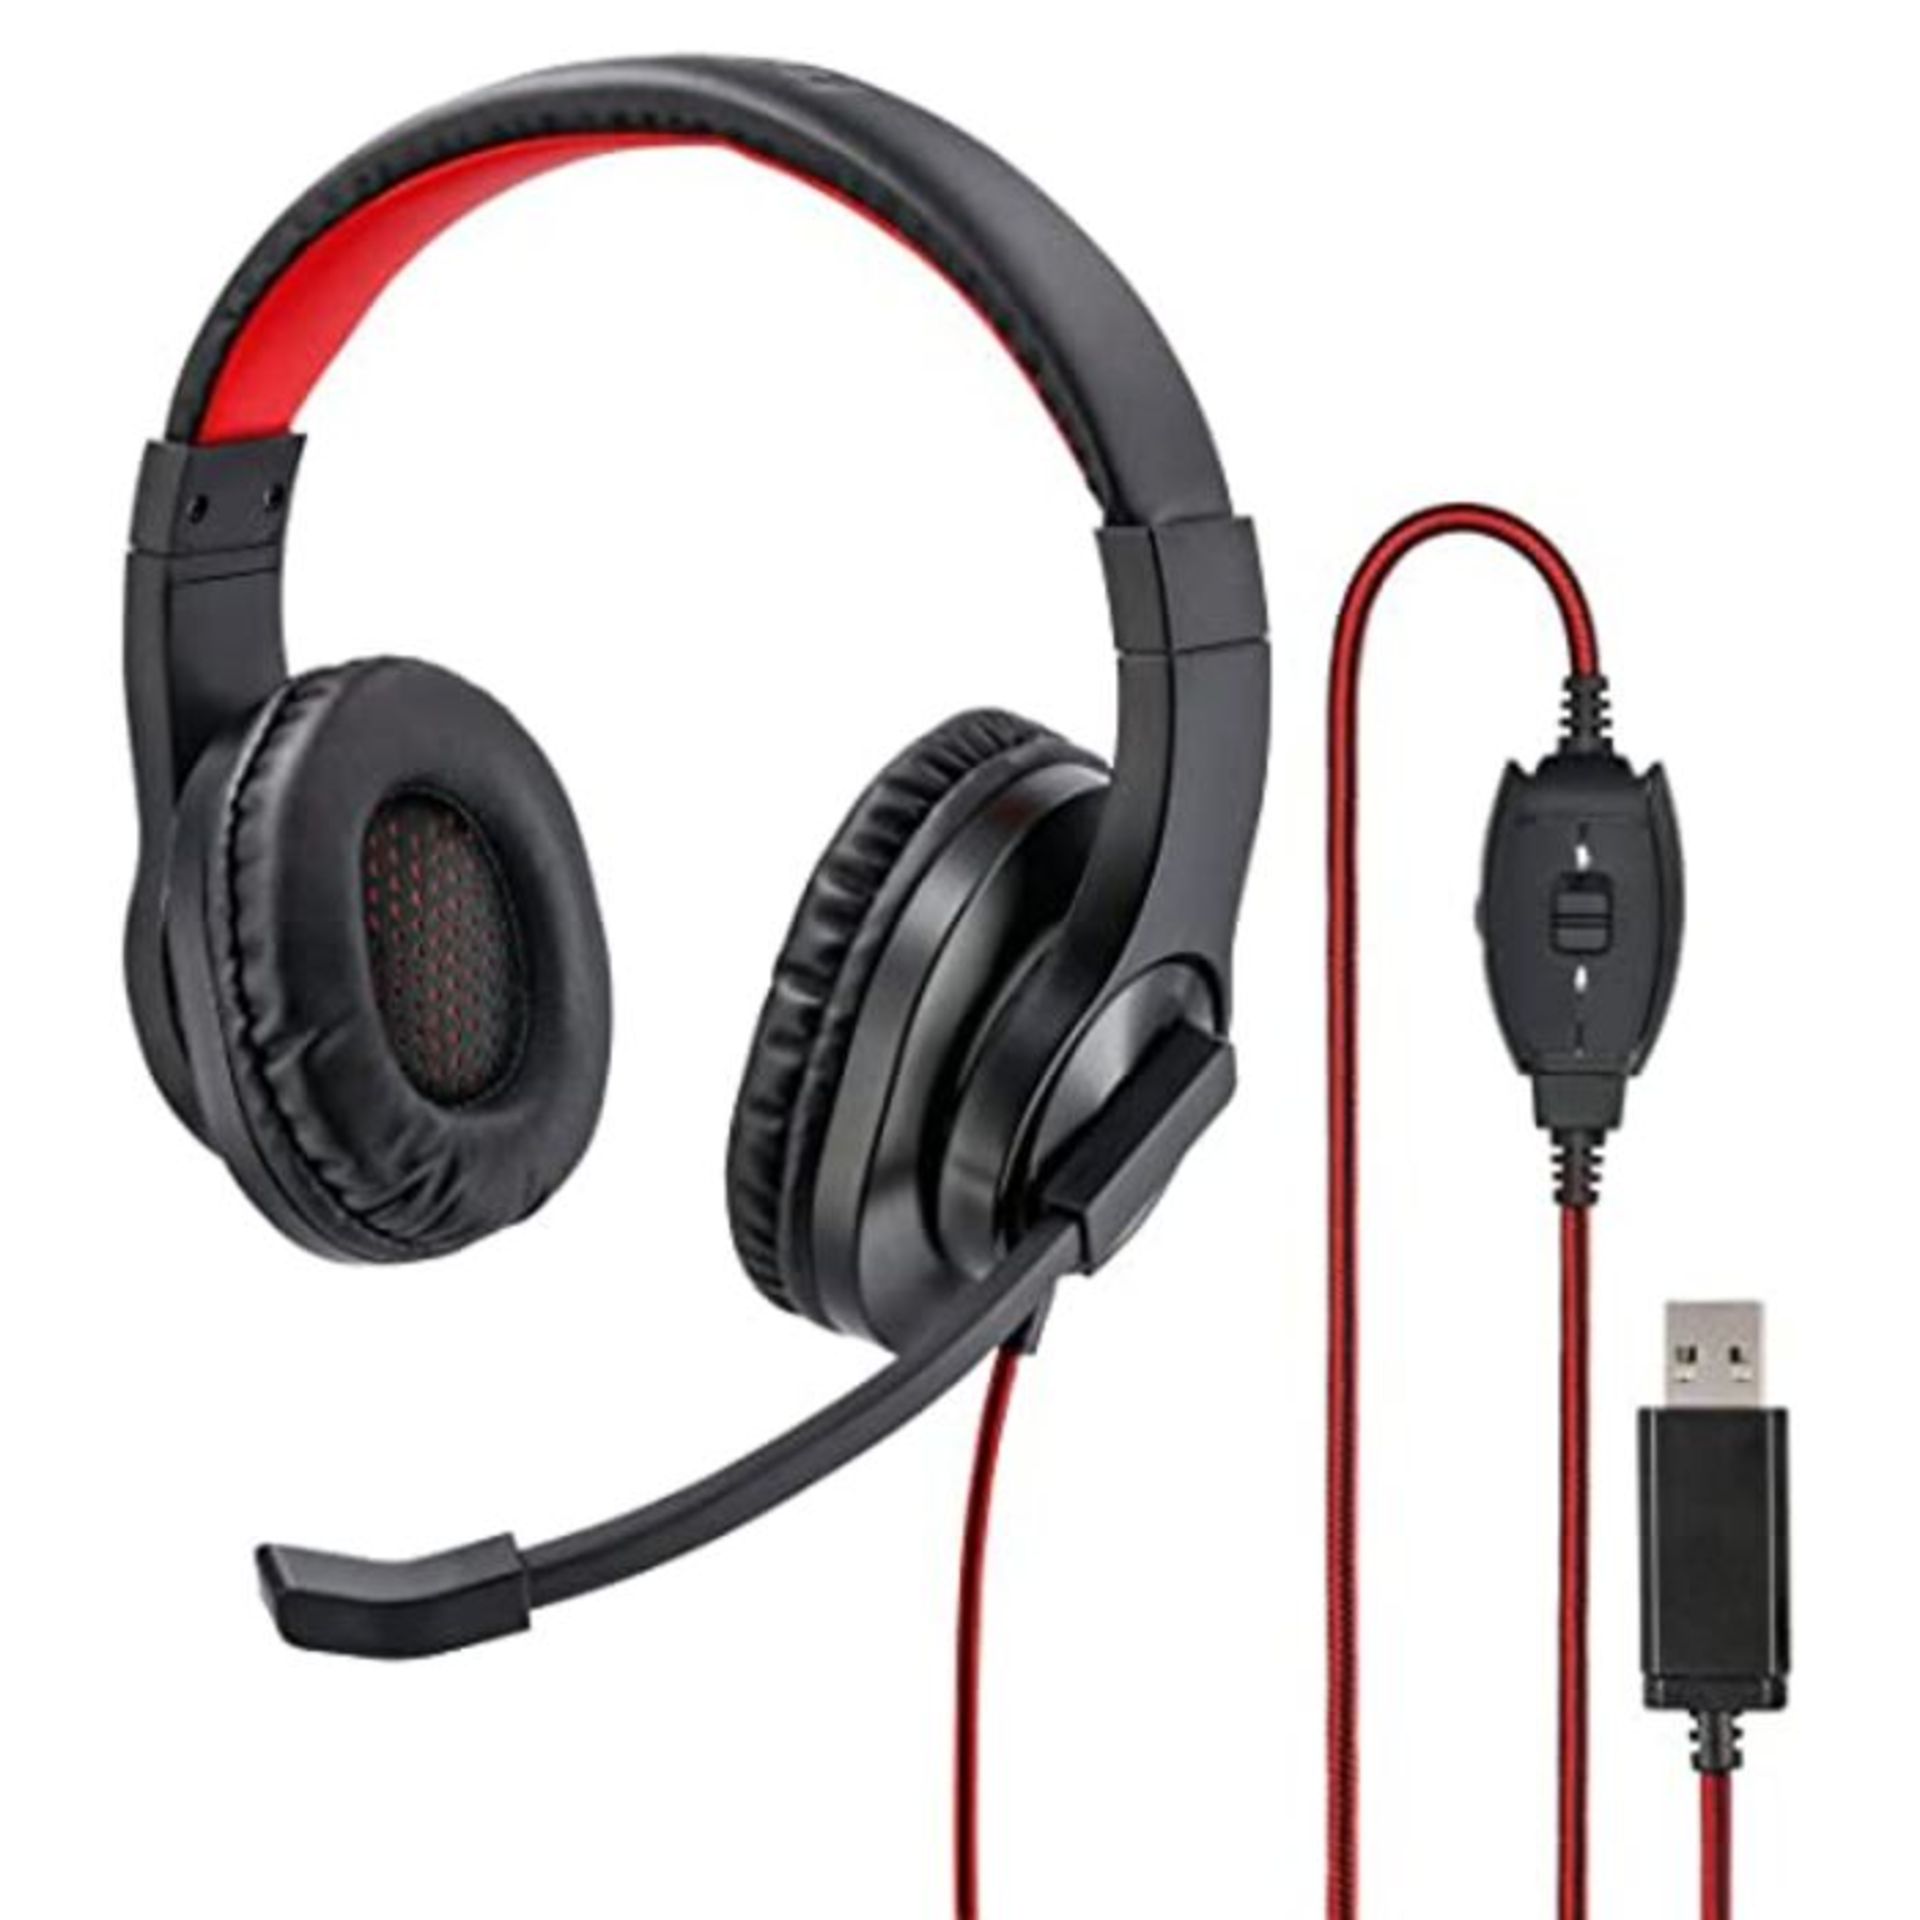 Hama USB Headset, Over Ear Headphones with Microphone (Headset with Volume Control and